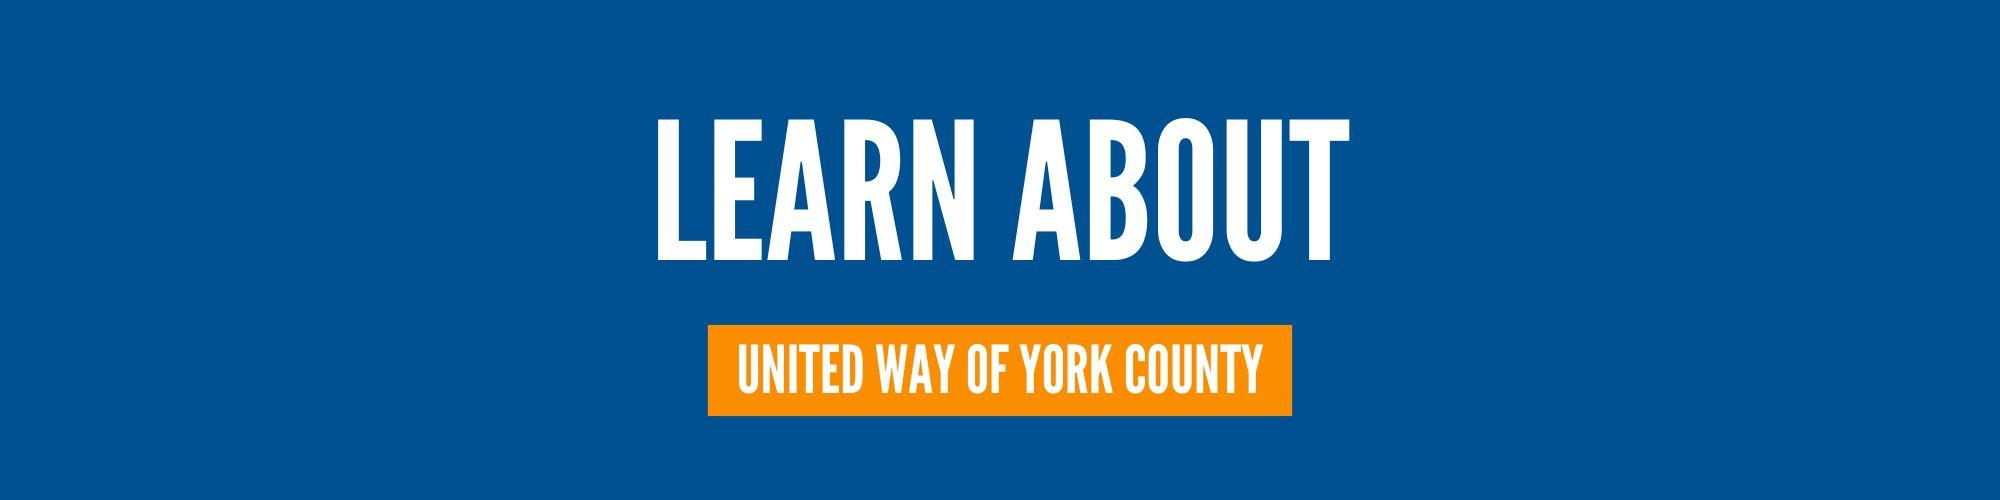 Learn About United Way of York County